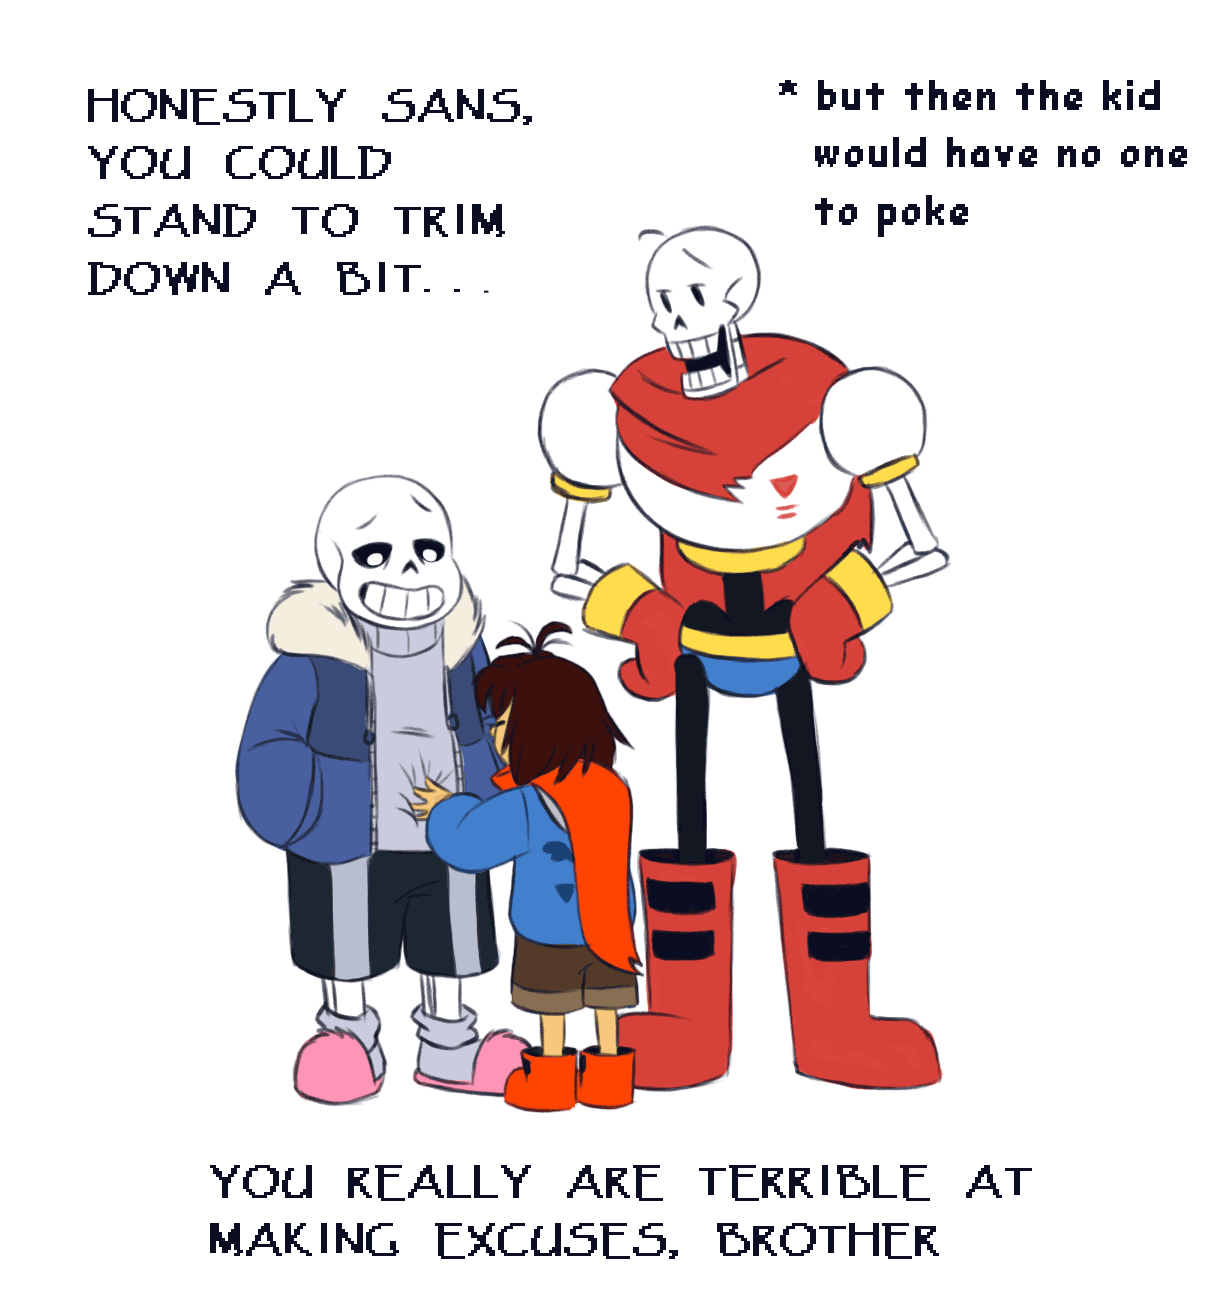 Which Sans are You?